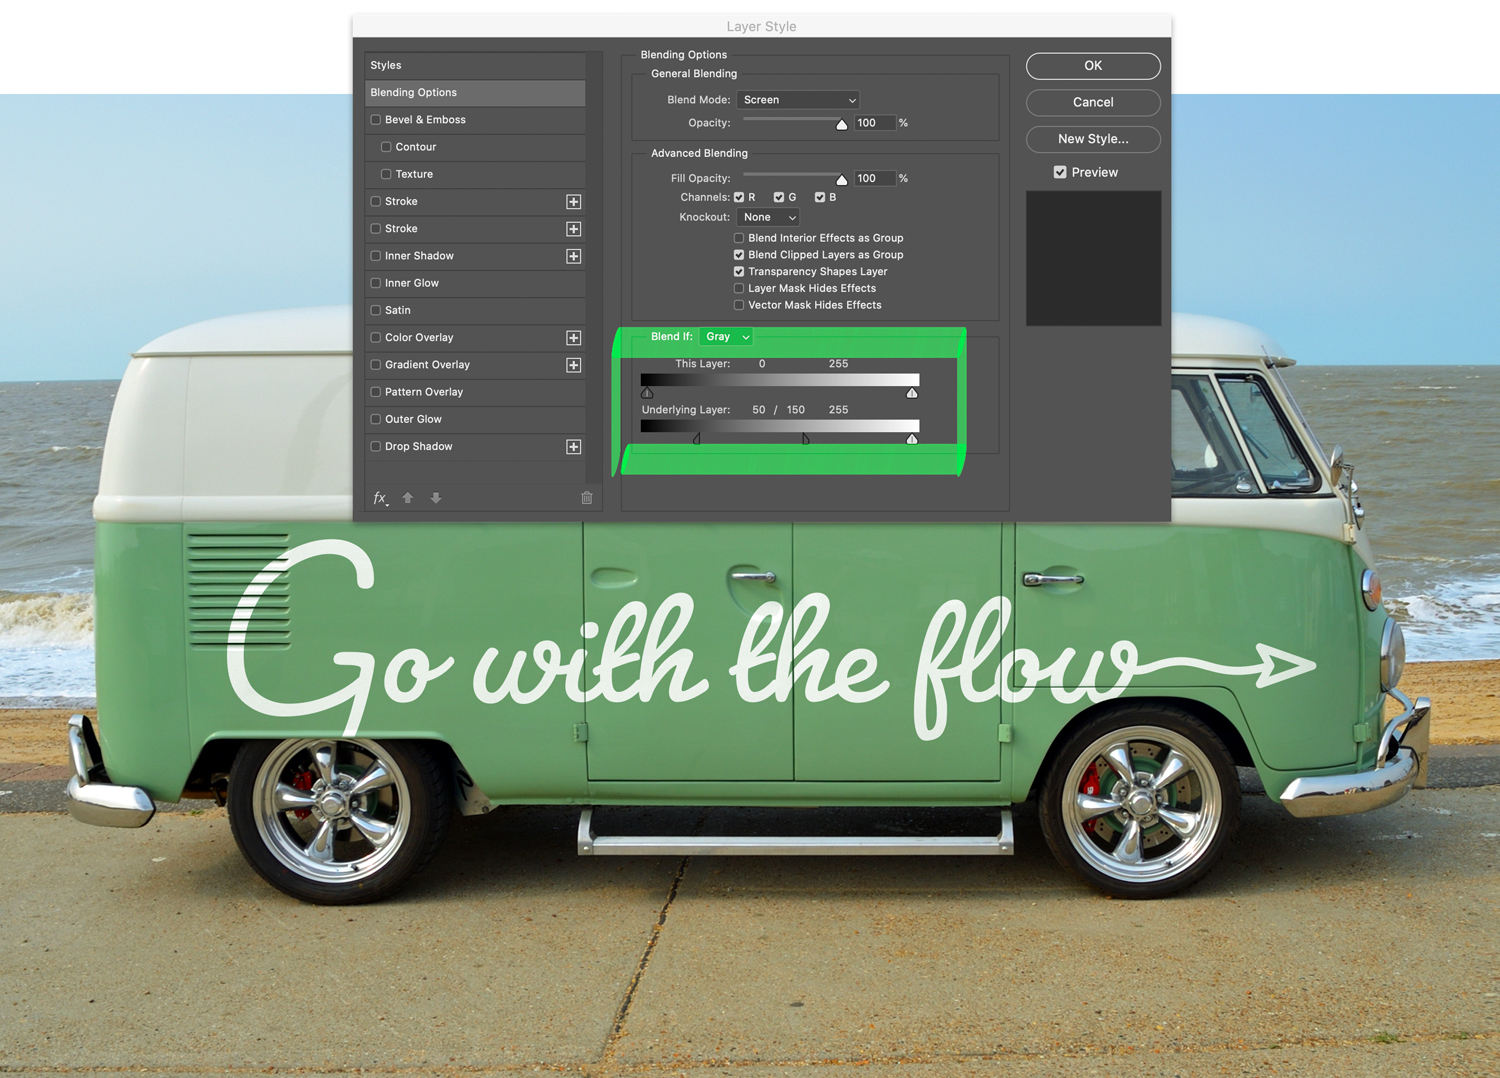 The layer style dialog box in Photoshop overlaid on the VW van